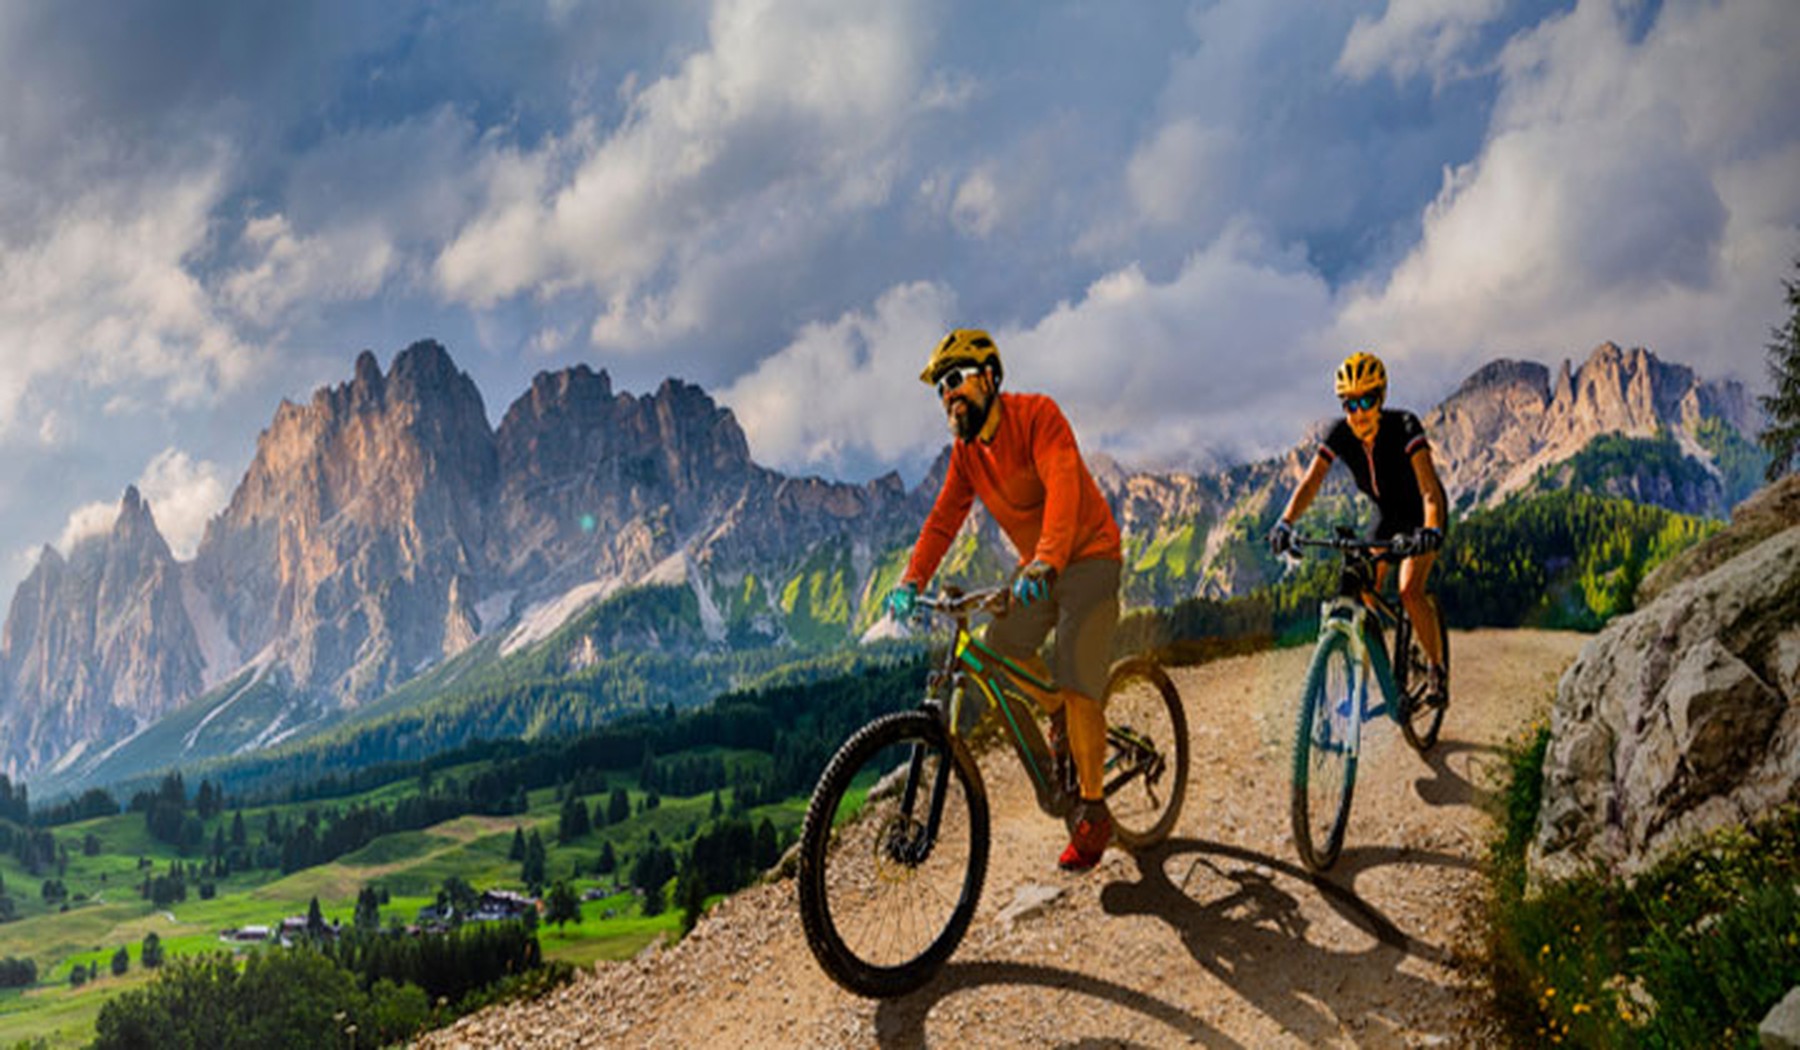 Two mountain bikers on a trail